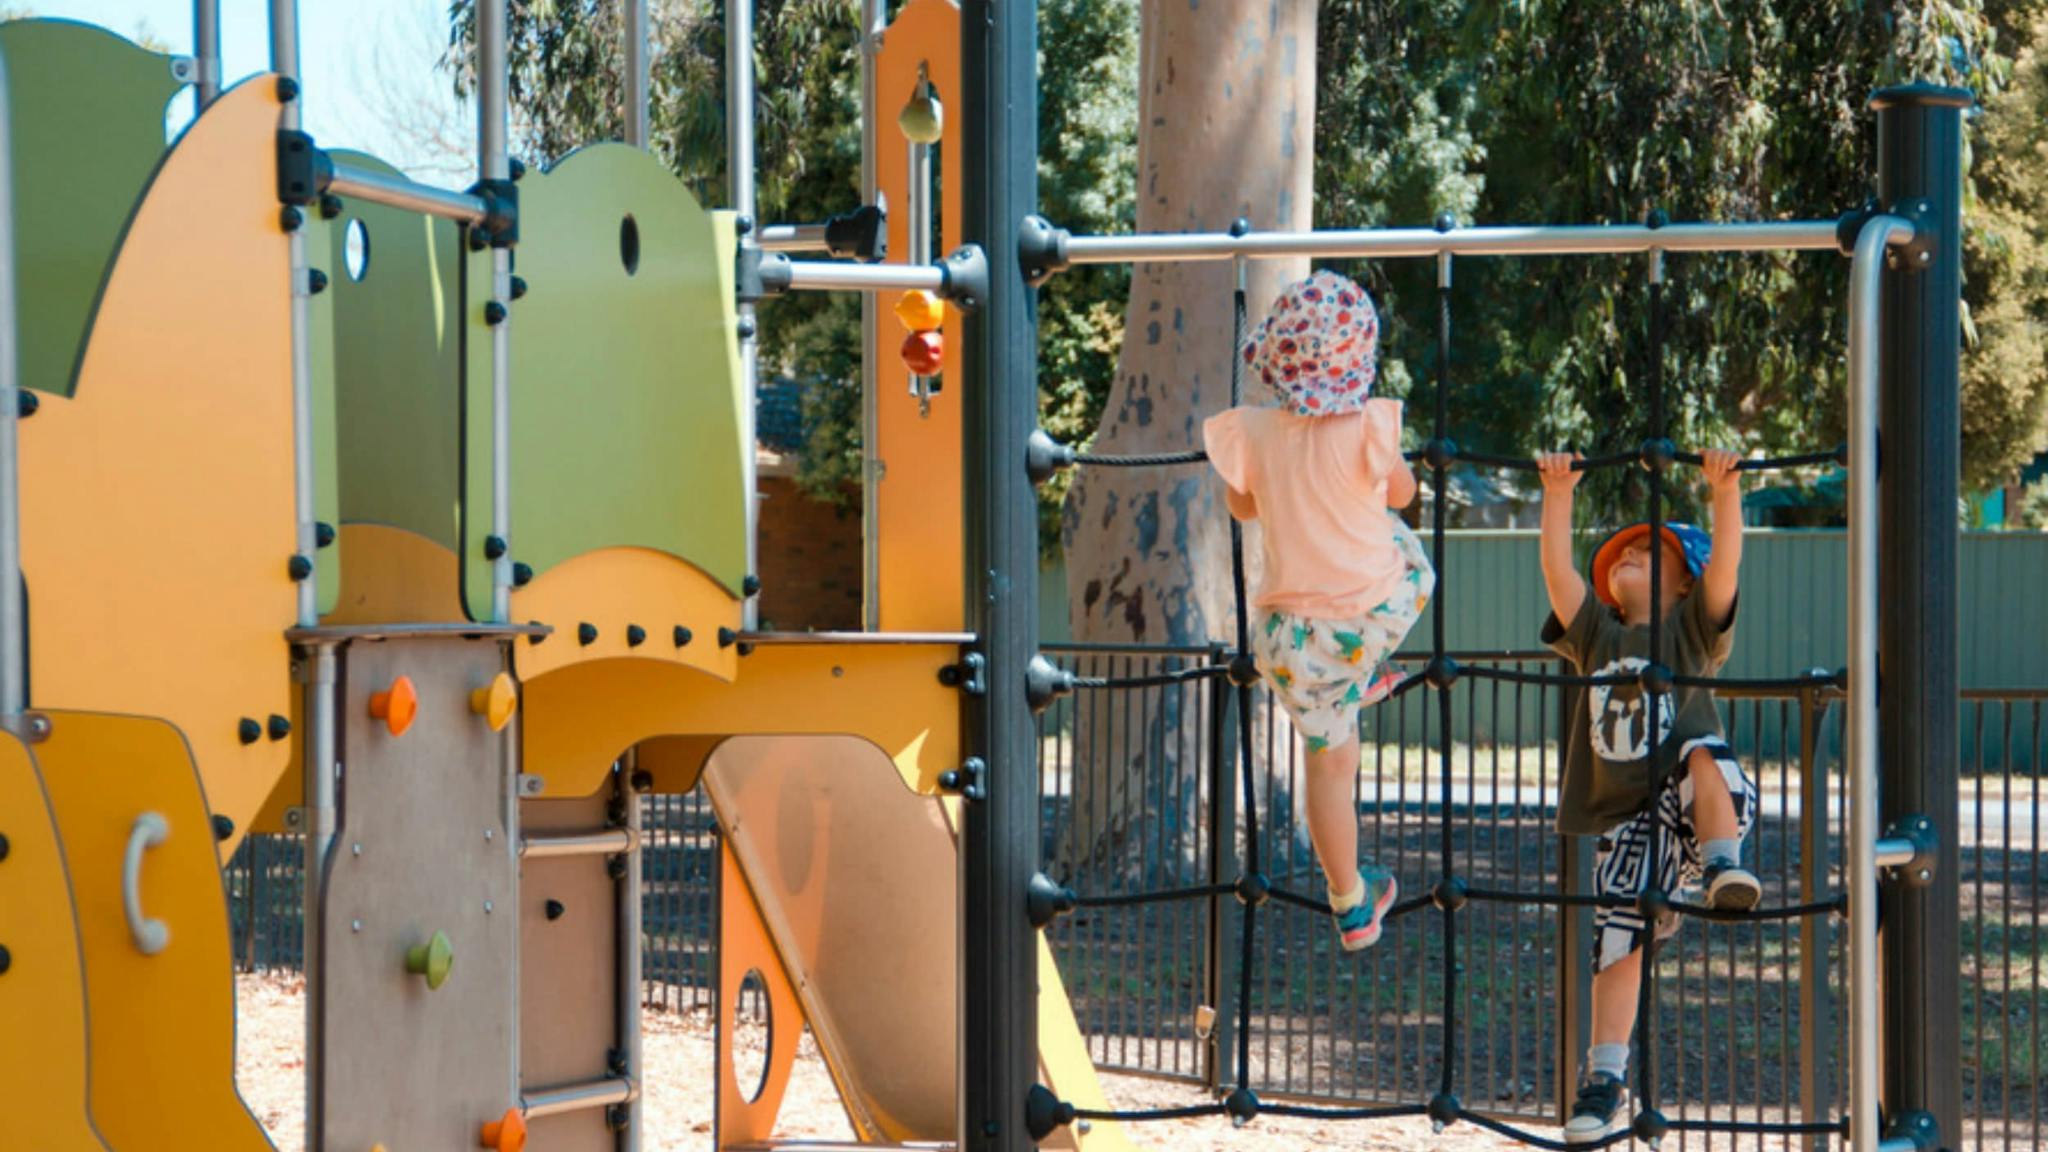 playground with children climbing on rope frame, slide and in the background gum tree